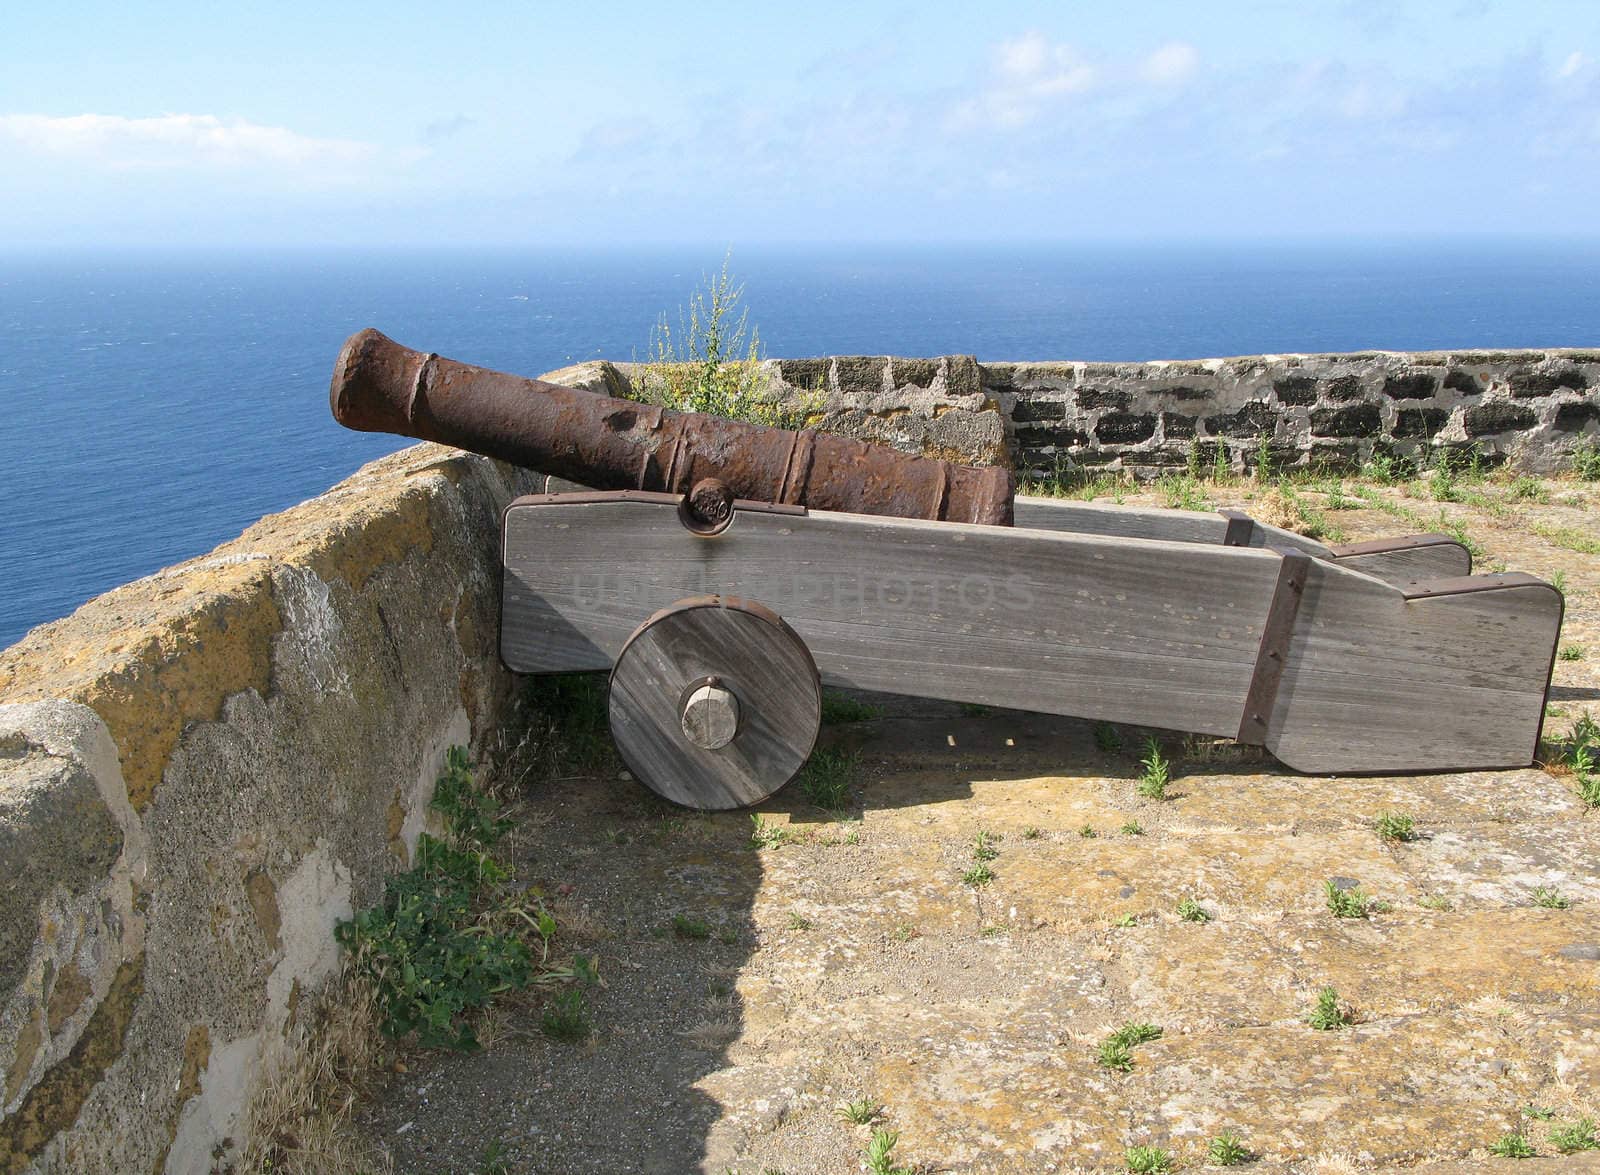 Antique cannon on a fortress.